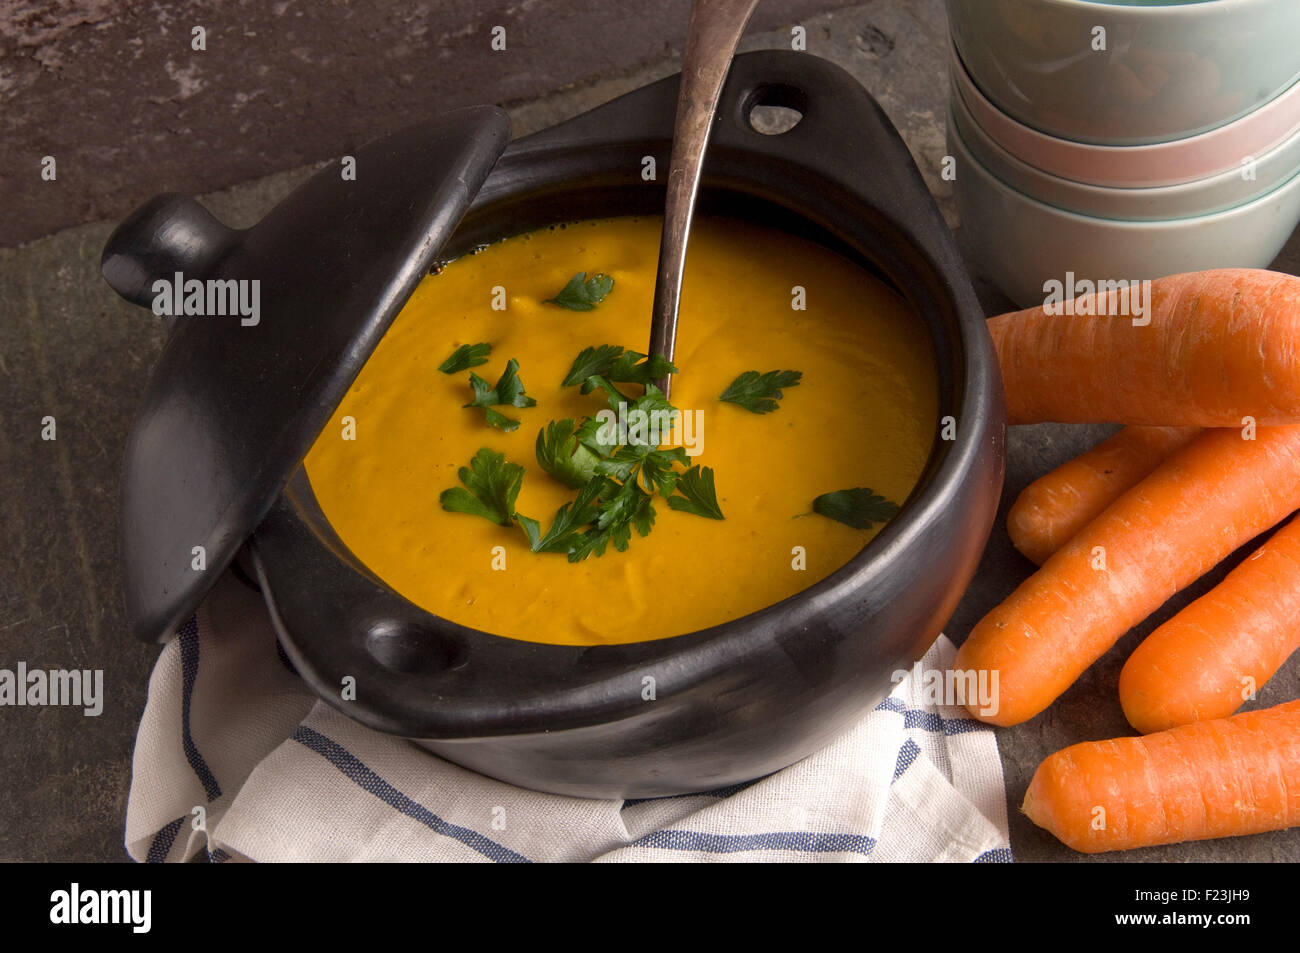 Carrot soup, a vegetarian meal in a deep bowl, often served as a a starter course. 'small plate' 'small dish' a UK food cuisine Stock Photo